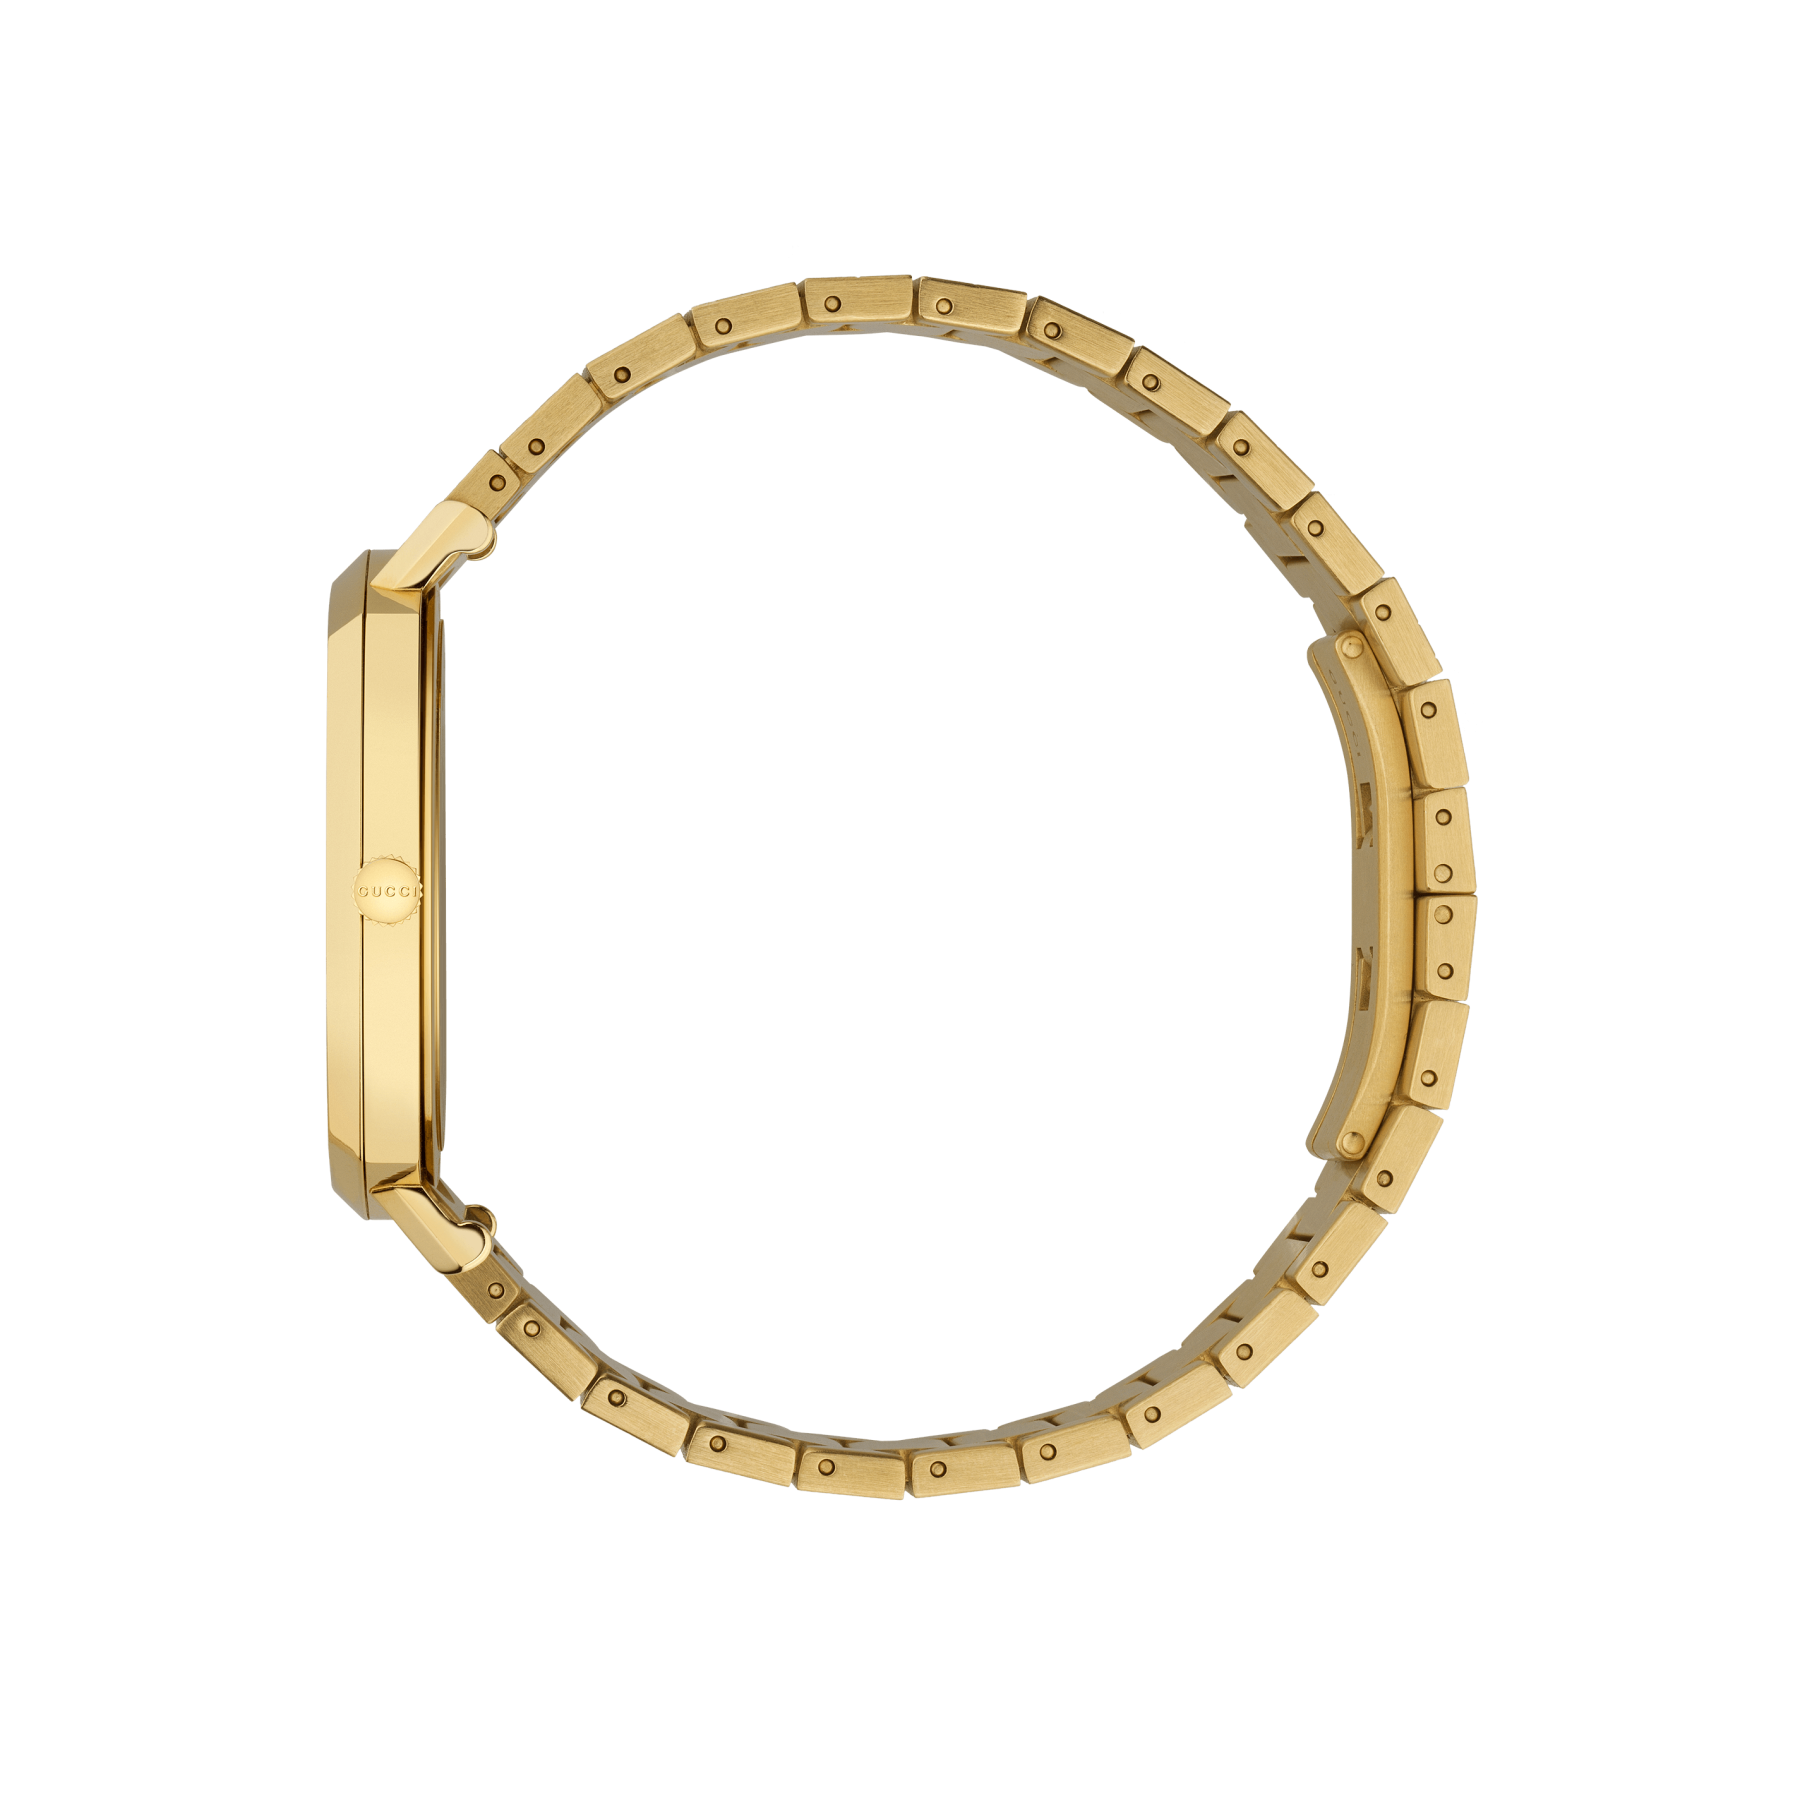 Gucci Grip 35mm Yellow Gold Watch side view